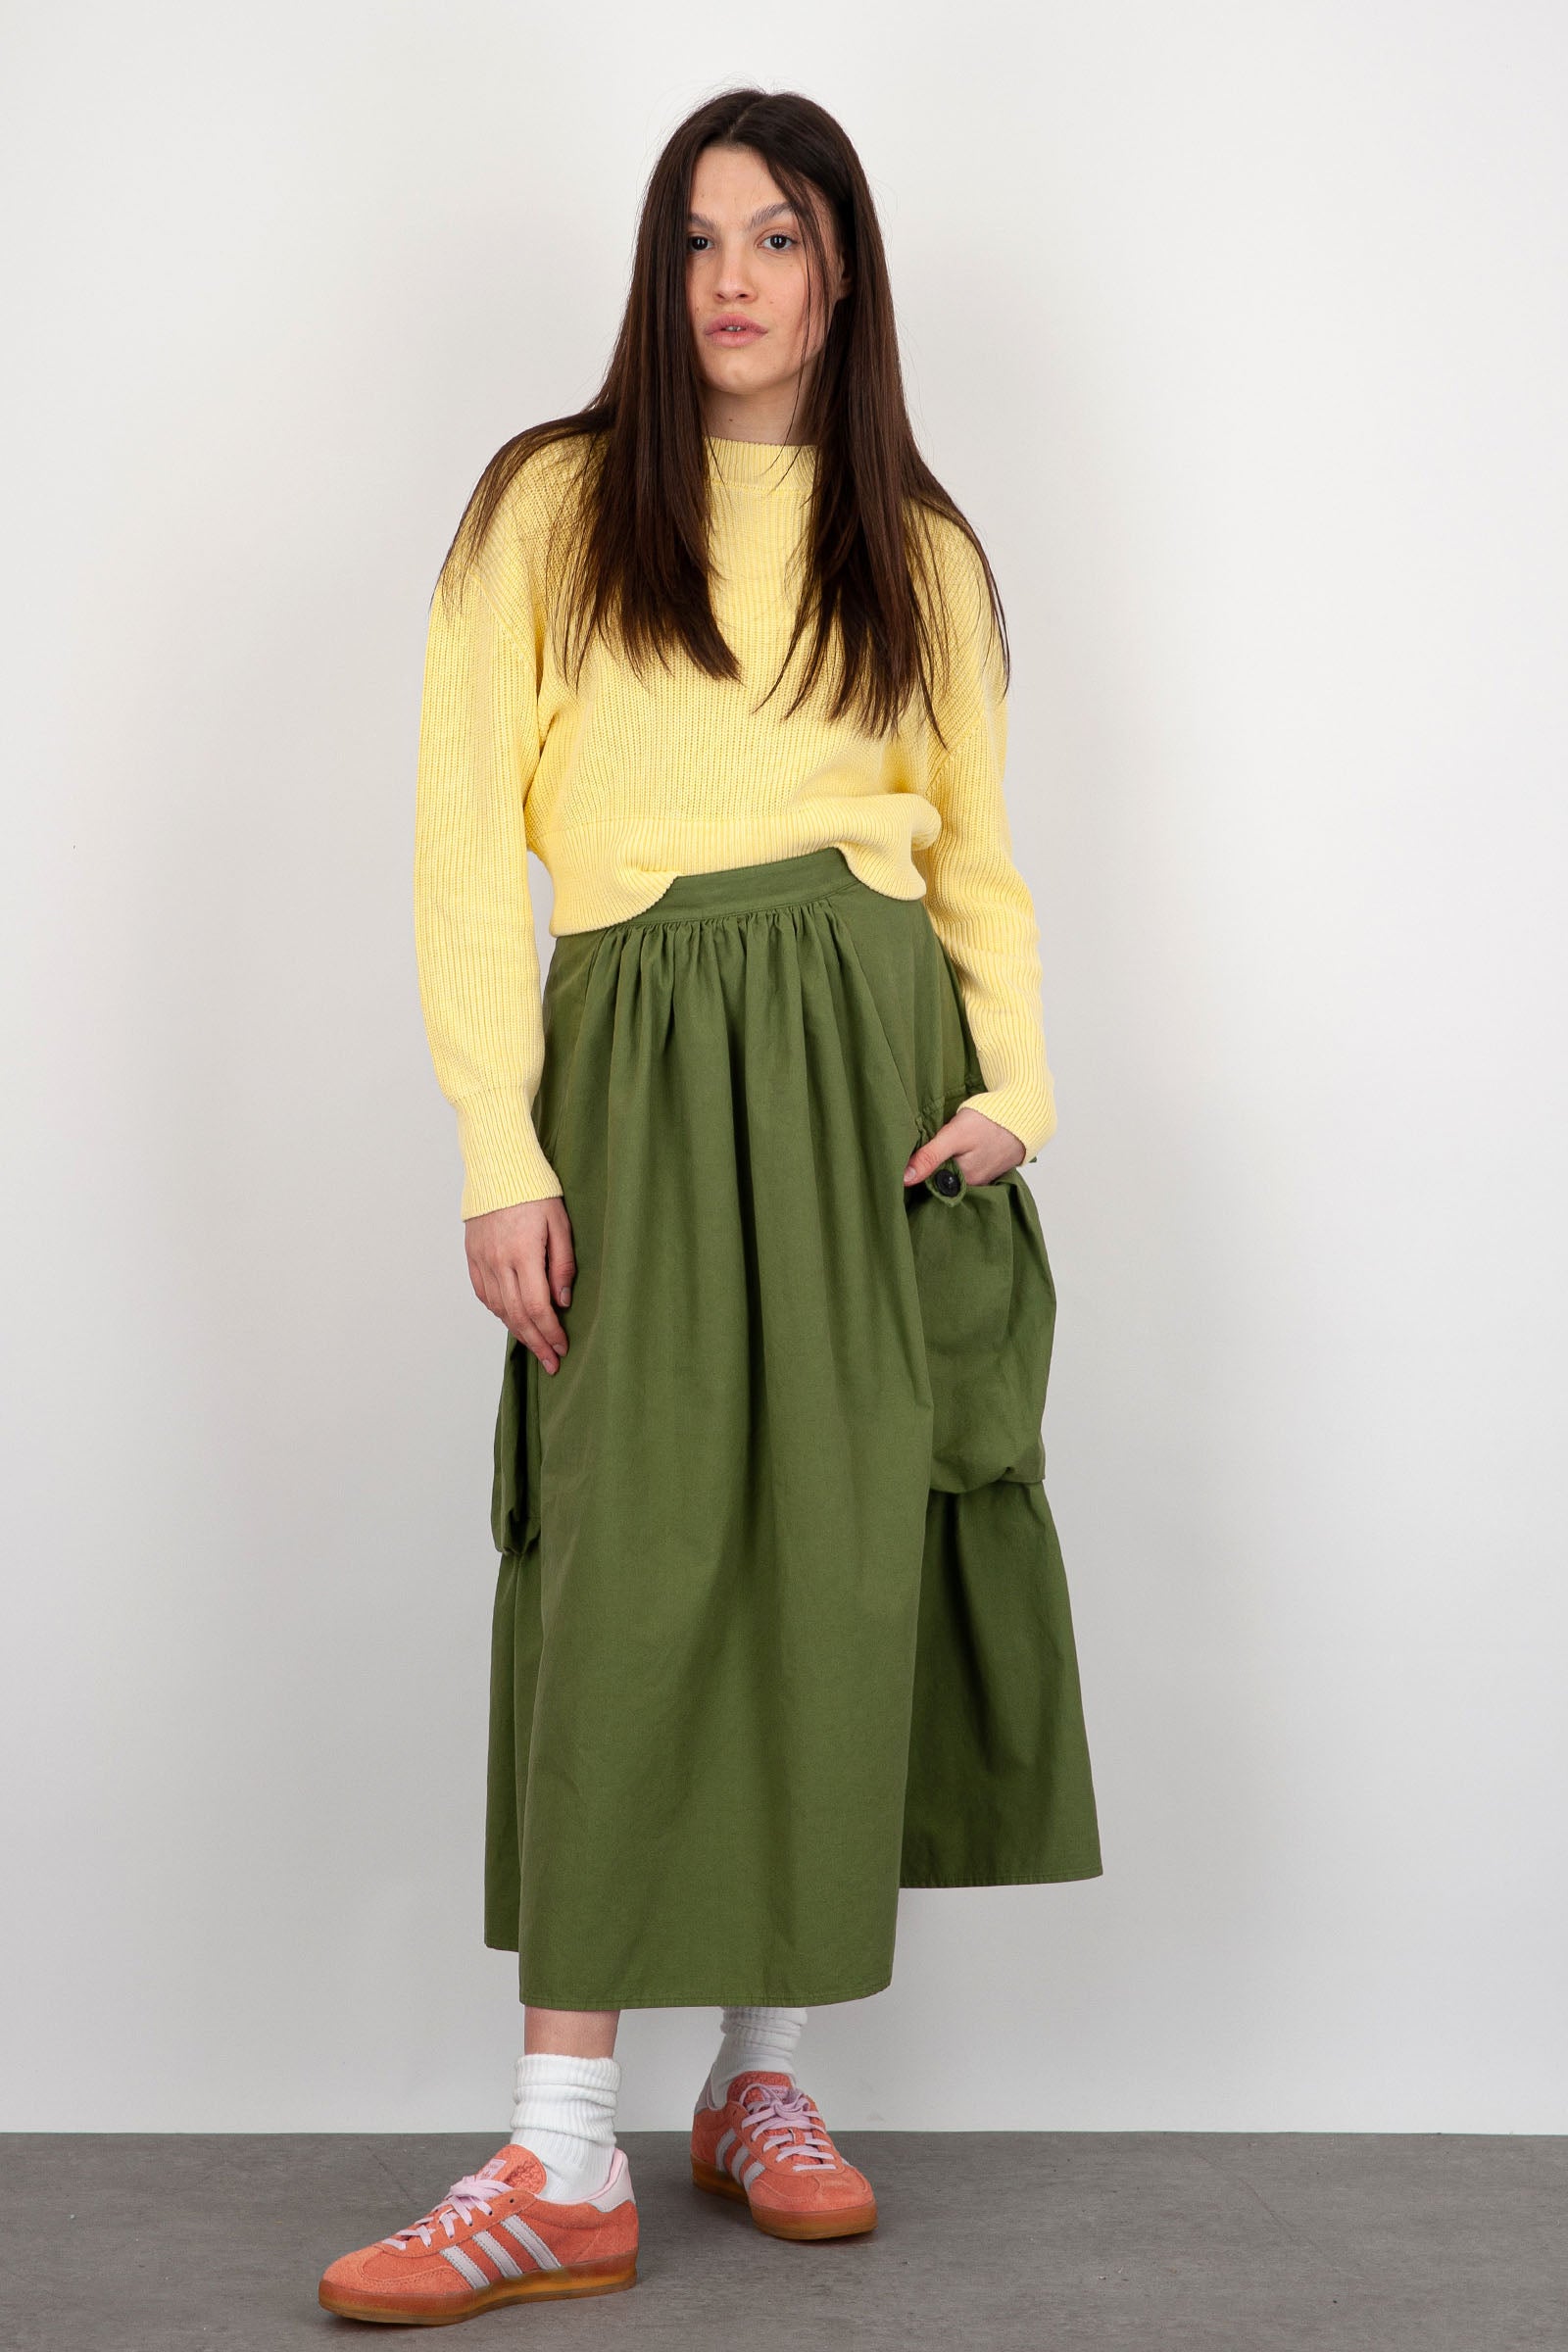 Department Five Selma Skirt in Military Green Cotton - 2